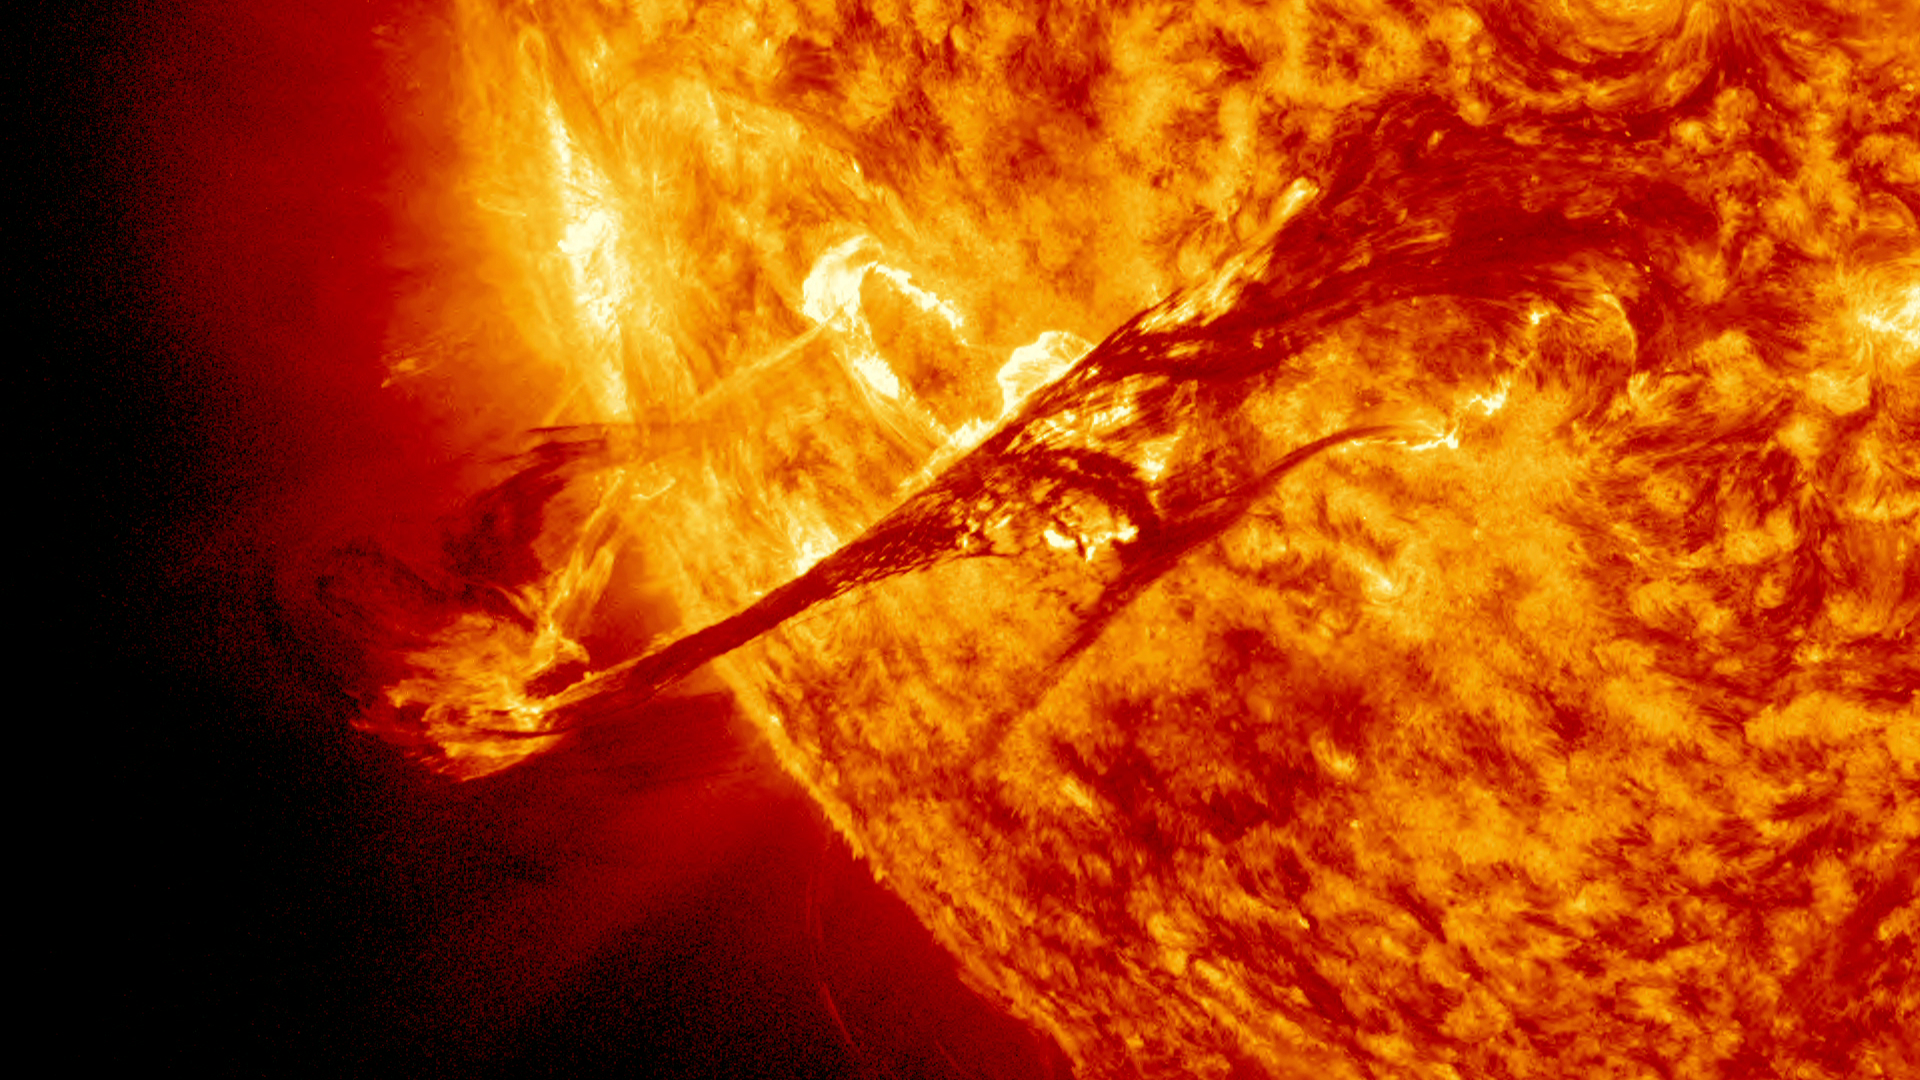 This movie shows the ejection from a variety of viewpoints as captured by NASA's Solar Dynamics Observatory (SDO), NASA's Solar Terrestrial Relations Observatory (STEREO), and the joint ESA/NASA Solar Heliospheric Observatory (SOHO). For complete transcript, click here.